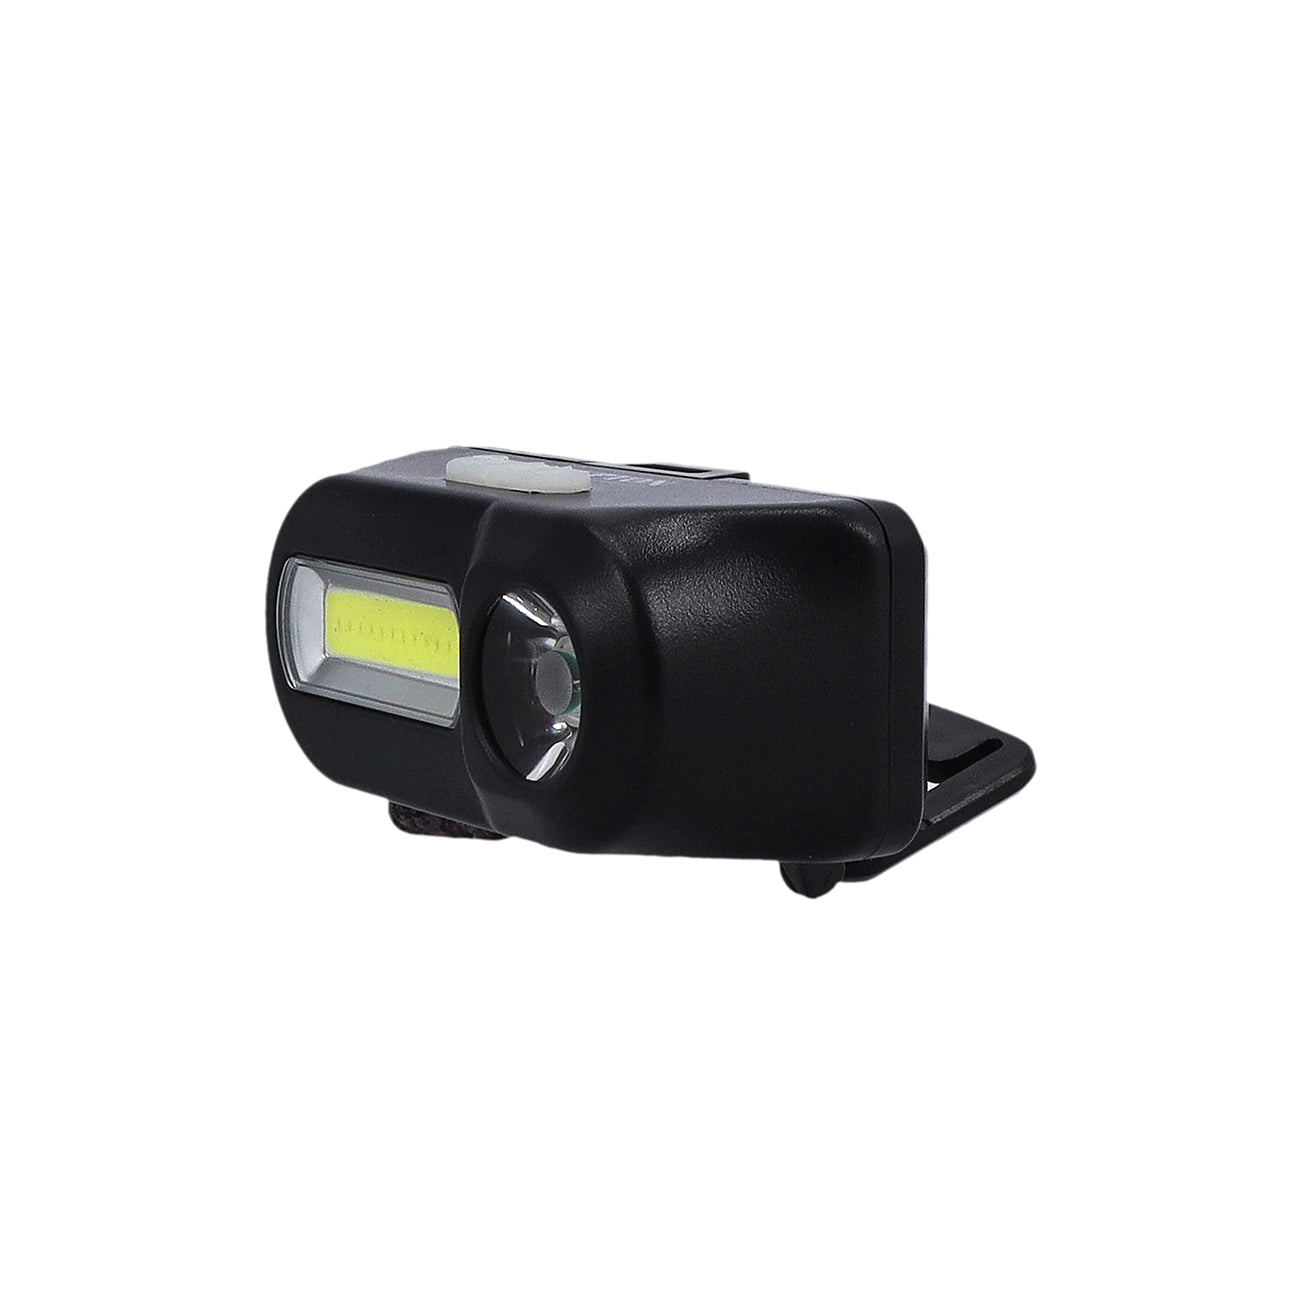 Double Headlight, Lithium Battery, 3W LED Light, KNHL5400 | 3W Cob Light | 5hrs Working